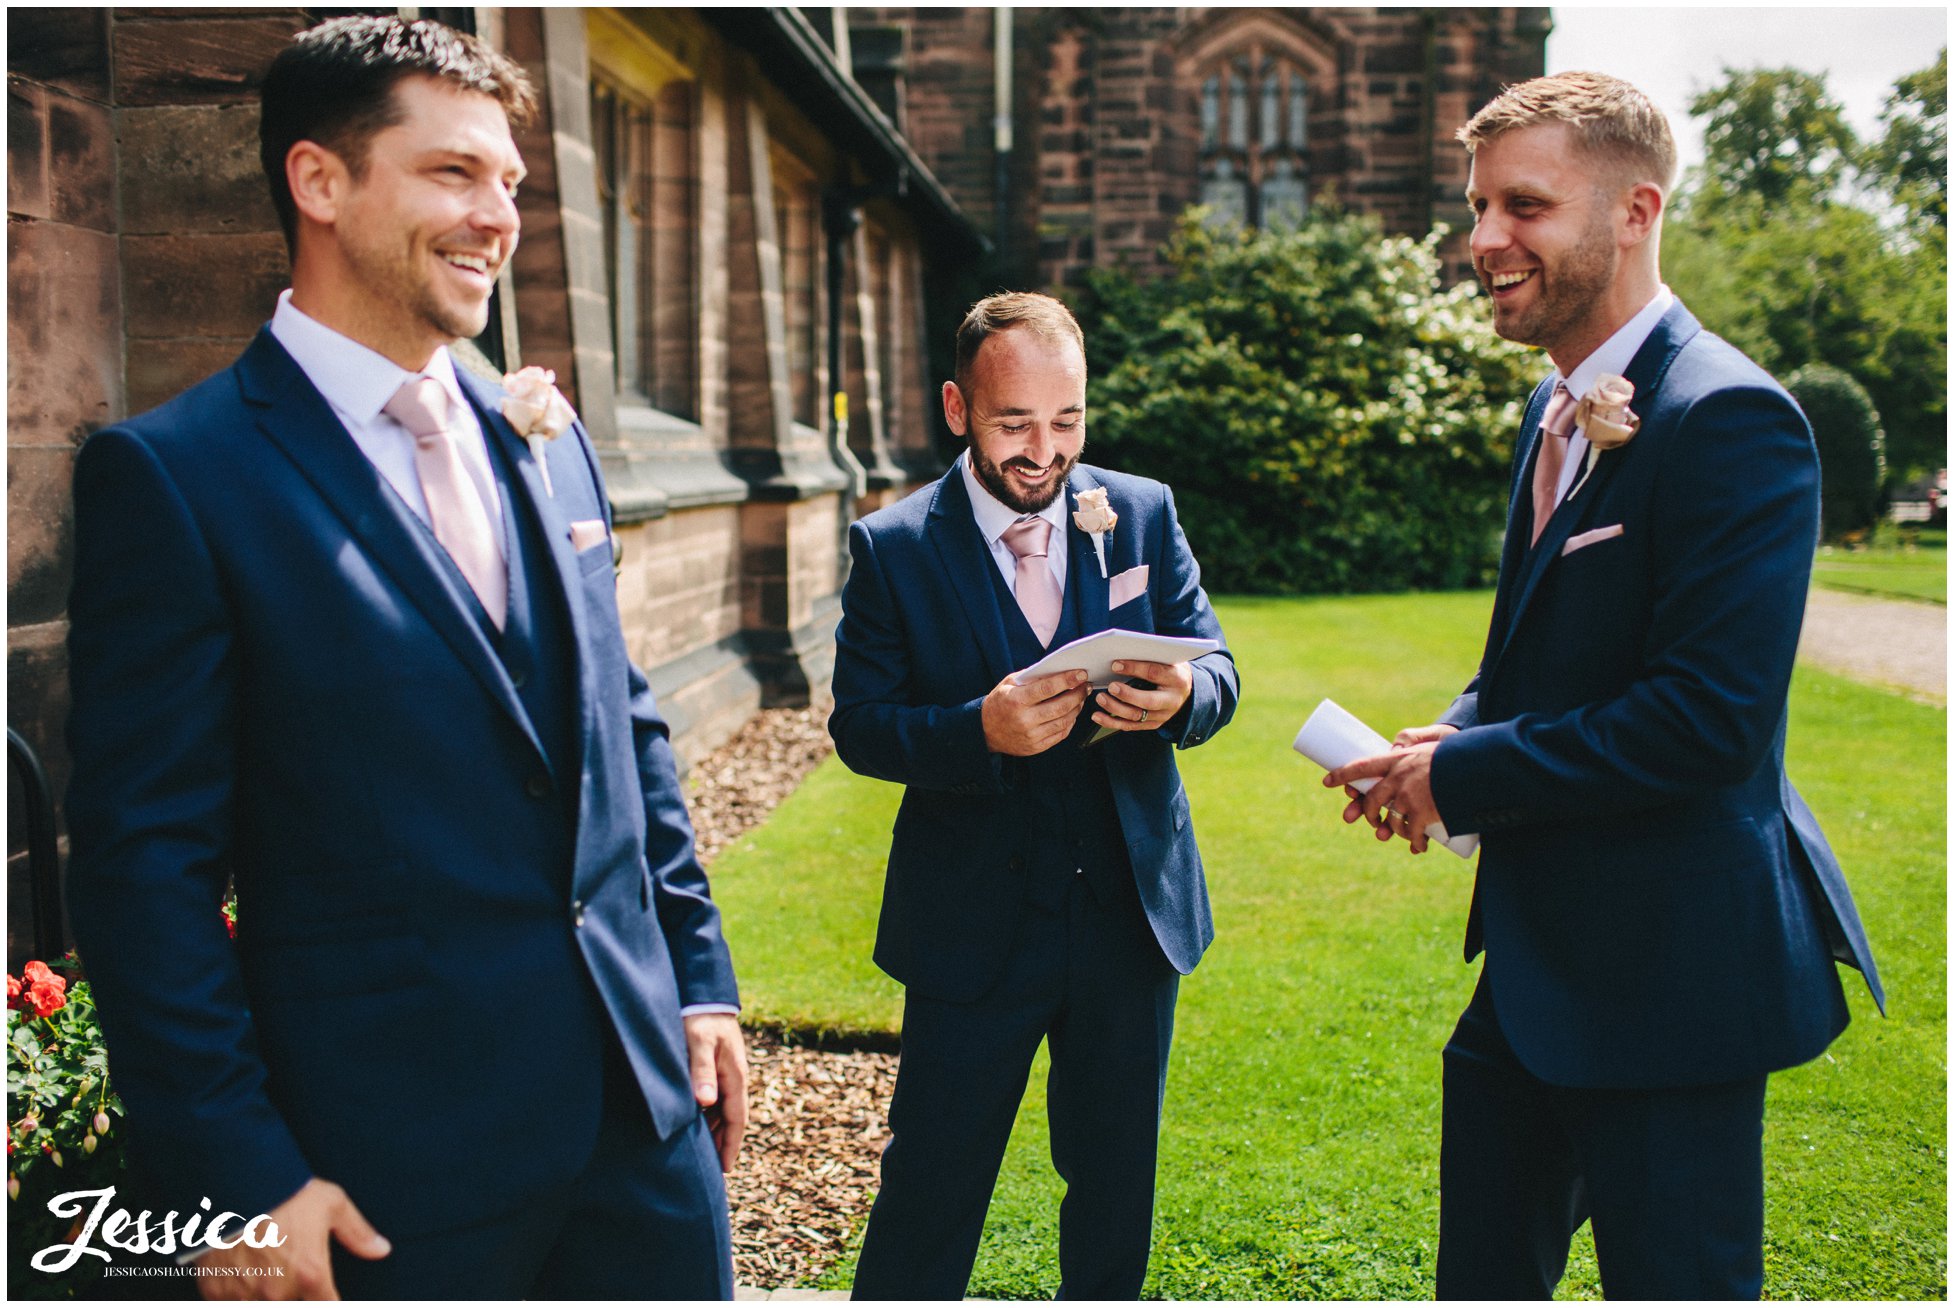 groomsmen great the guests as they arrive at the wirral church